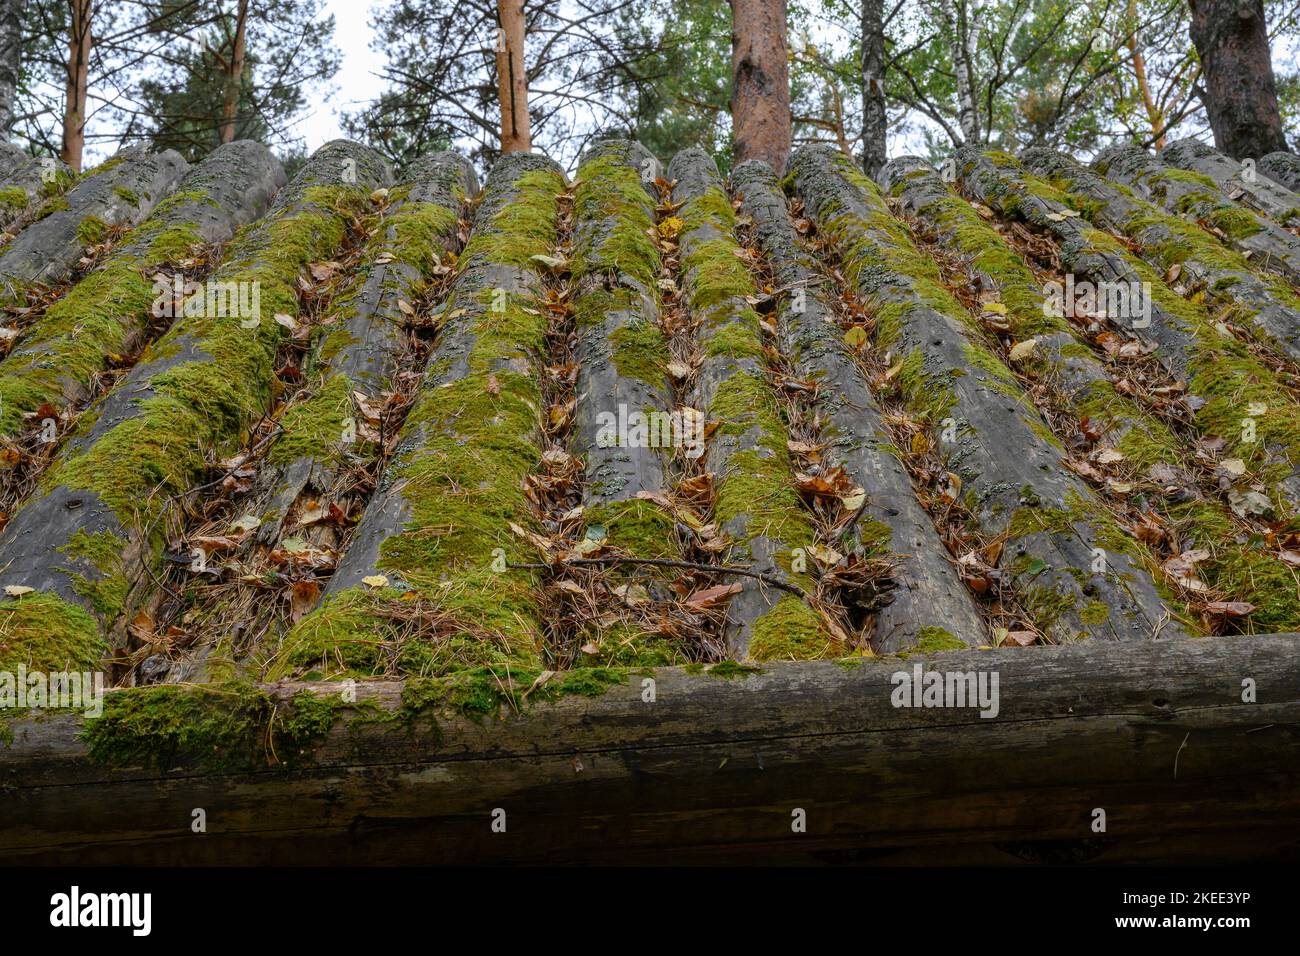 A close-up view of a roof made of logs covered with moss Stock Photo